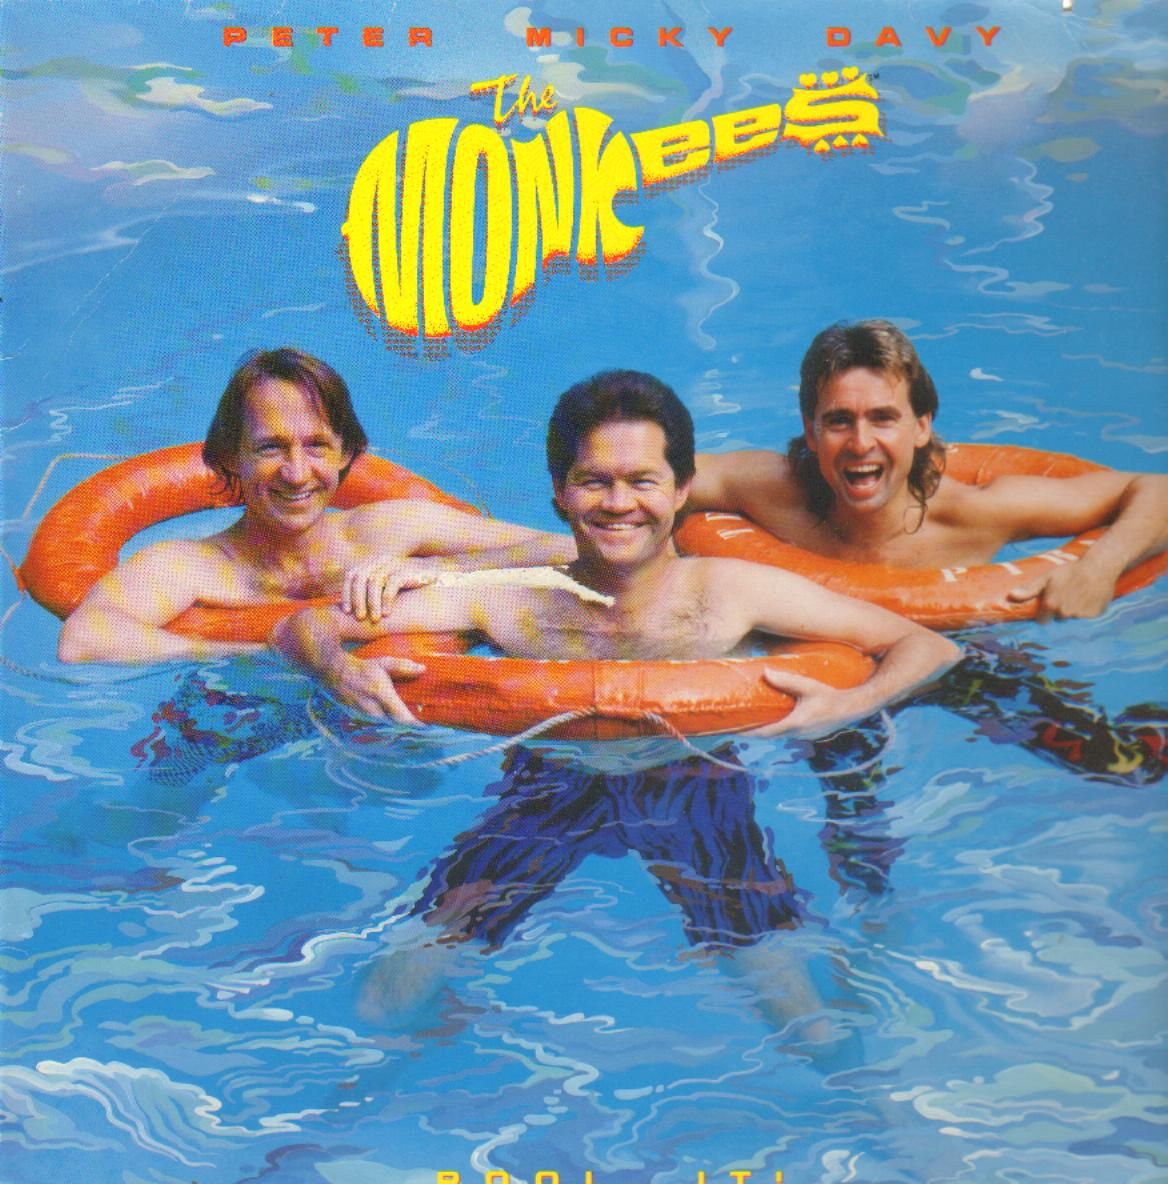 Alum artwork for 'Pool It!' by The Monkees